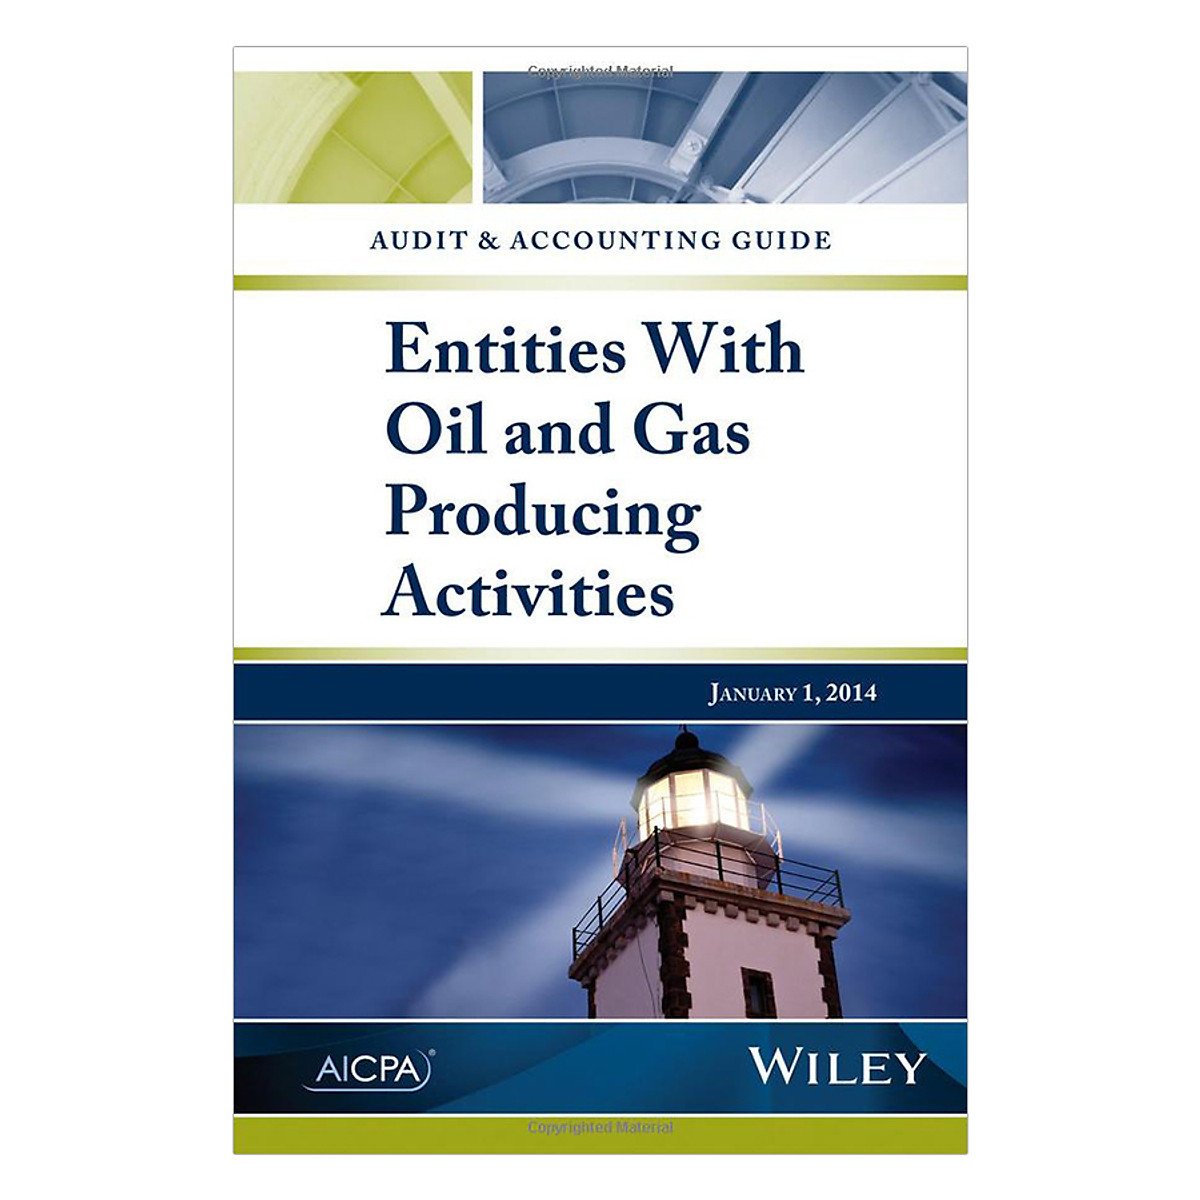 Audit And Accounting Guide: Entities With Oil And Gas Producing Activities